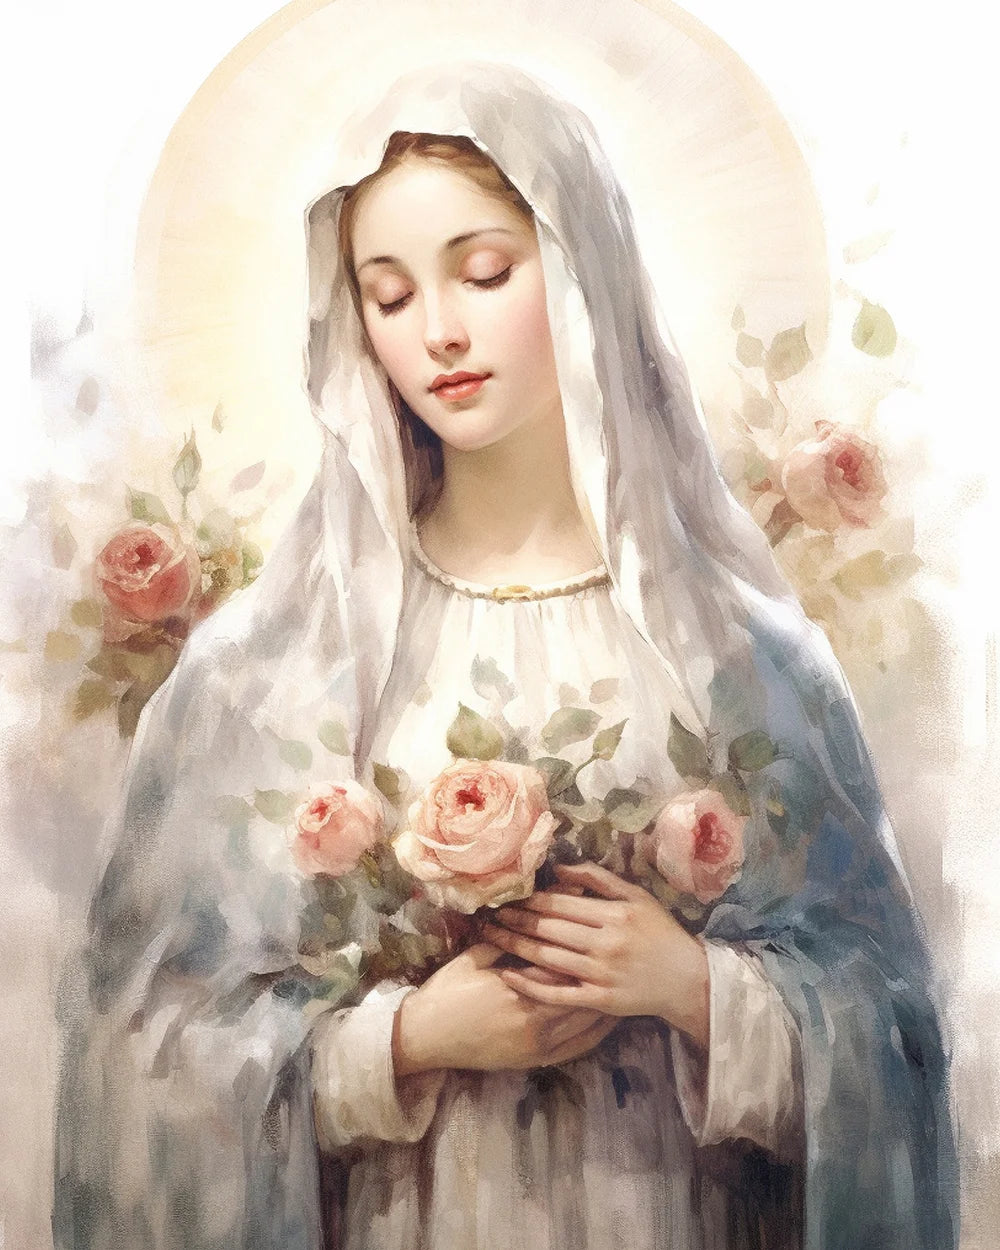 Blessed Virgin Mary fifteen promises to those who devoutly recite the rosary.